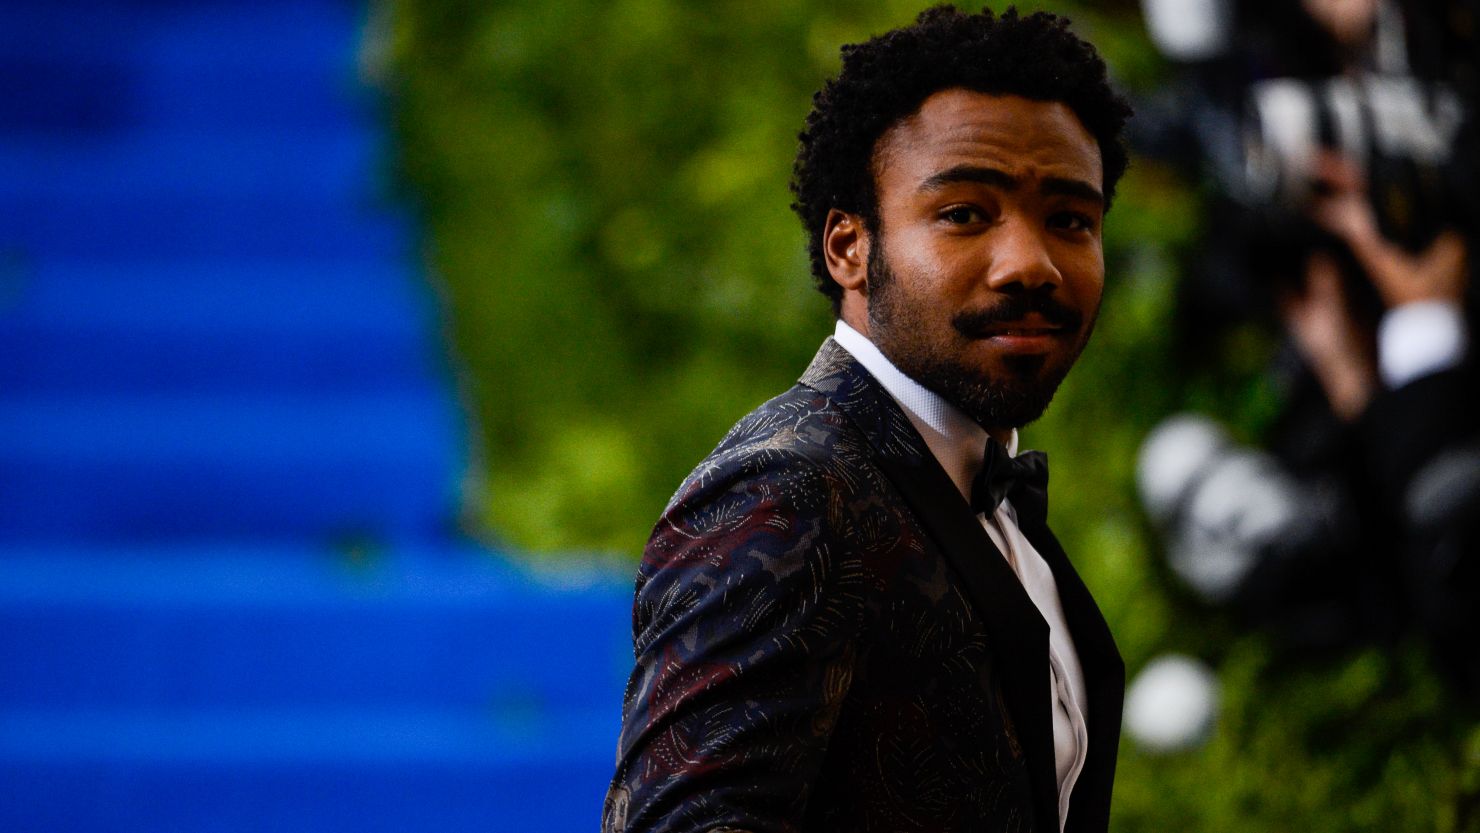 Donald Glover is getting out of the music game.